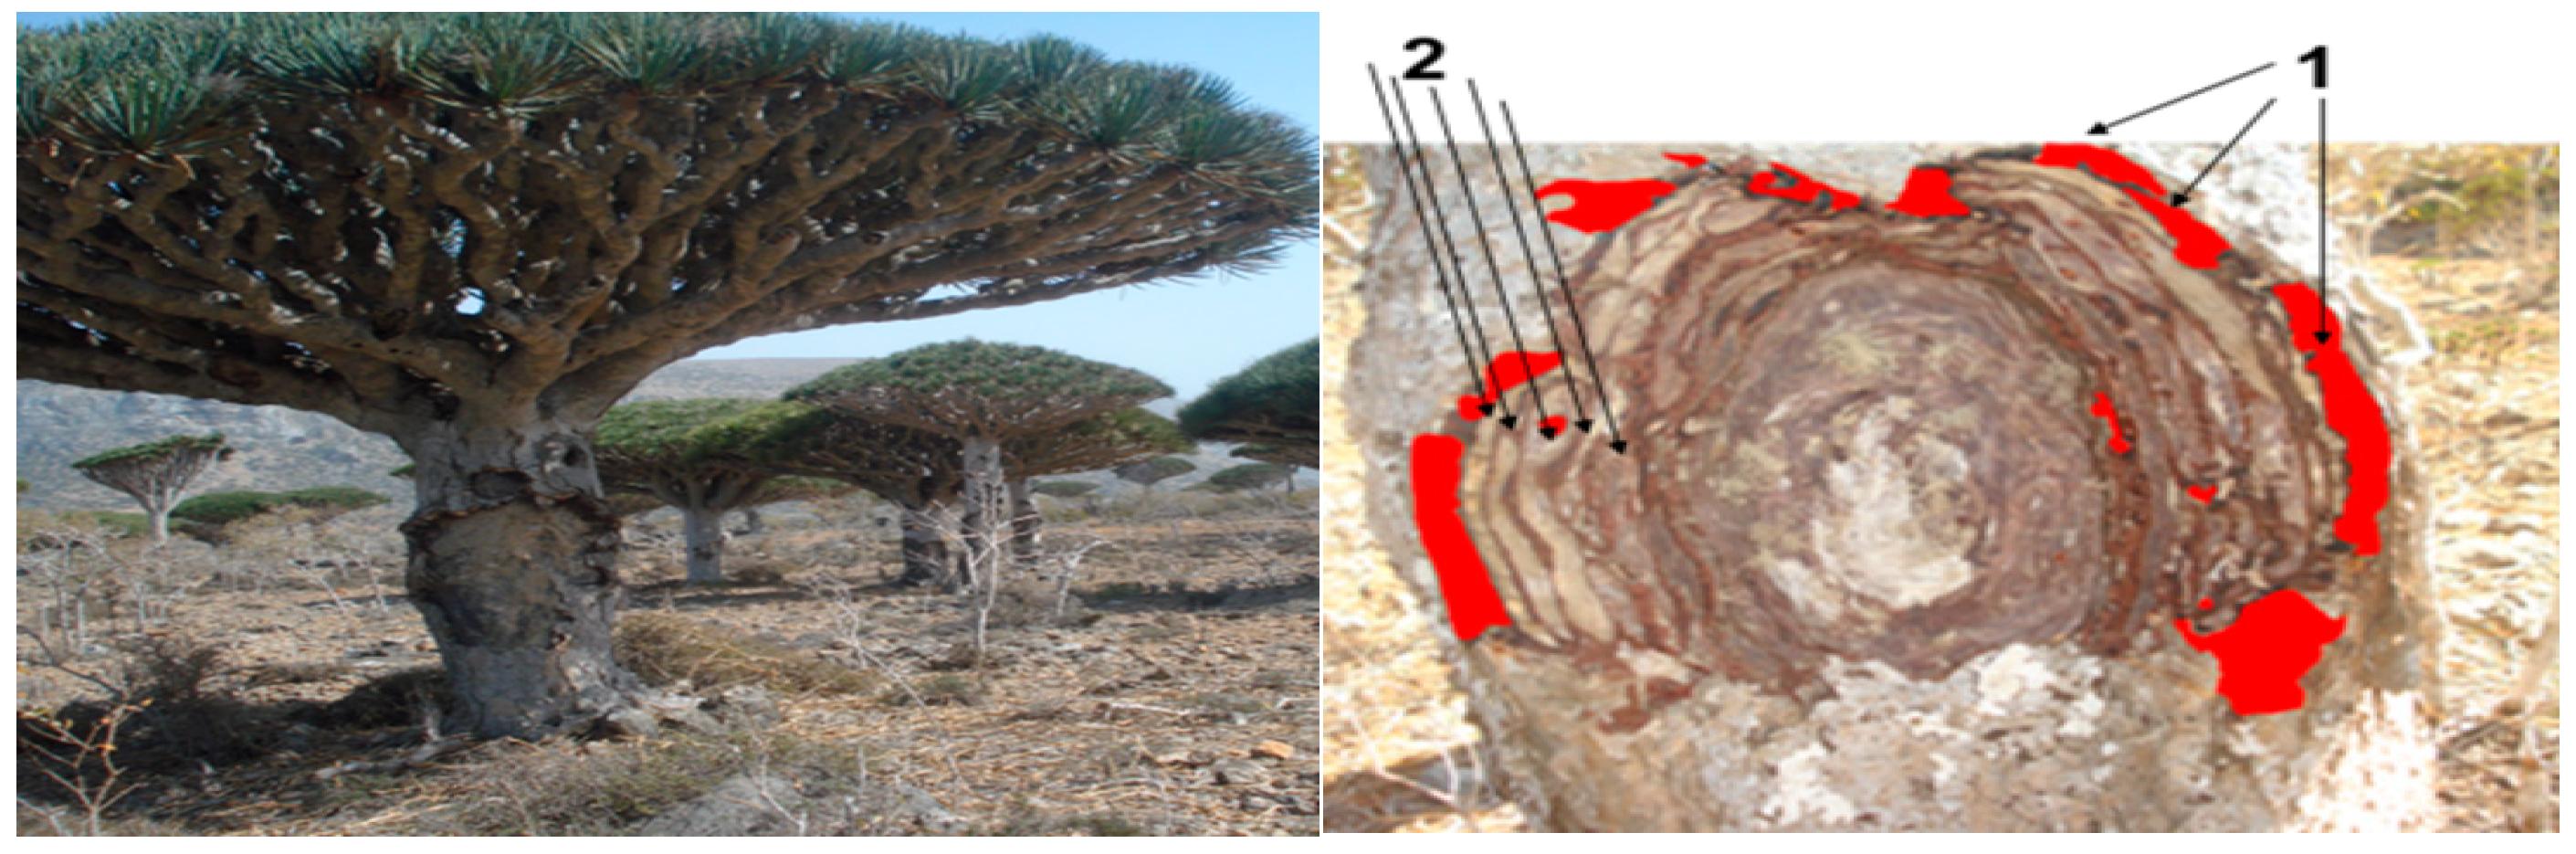 Forests | Free Full-Text | Local Management System of Dragon's Blood Tree ( Dracaena cinnabari Balf. f.) Resin in Firmihin Forest, Socotra Island, Yemen